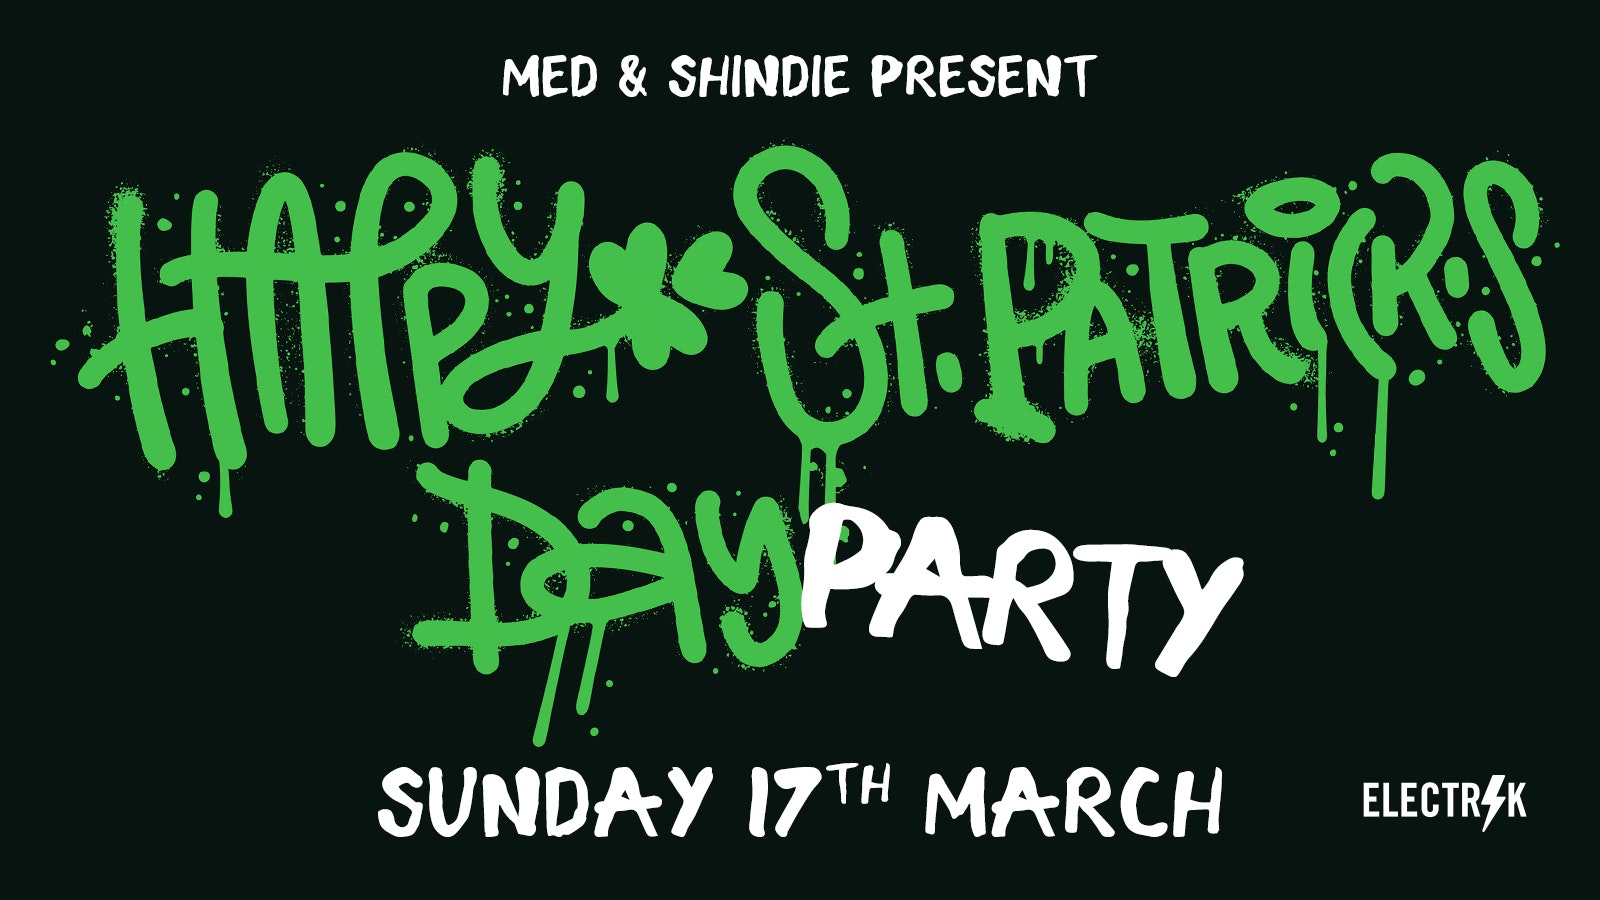 SHINDIE & MED – St Patrick’s Sunday Special